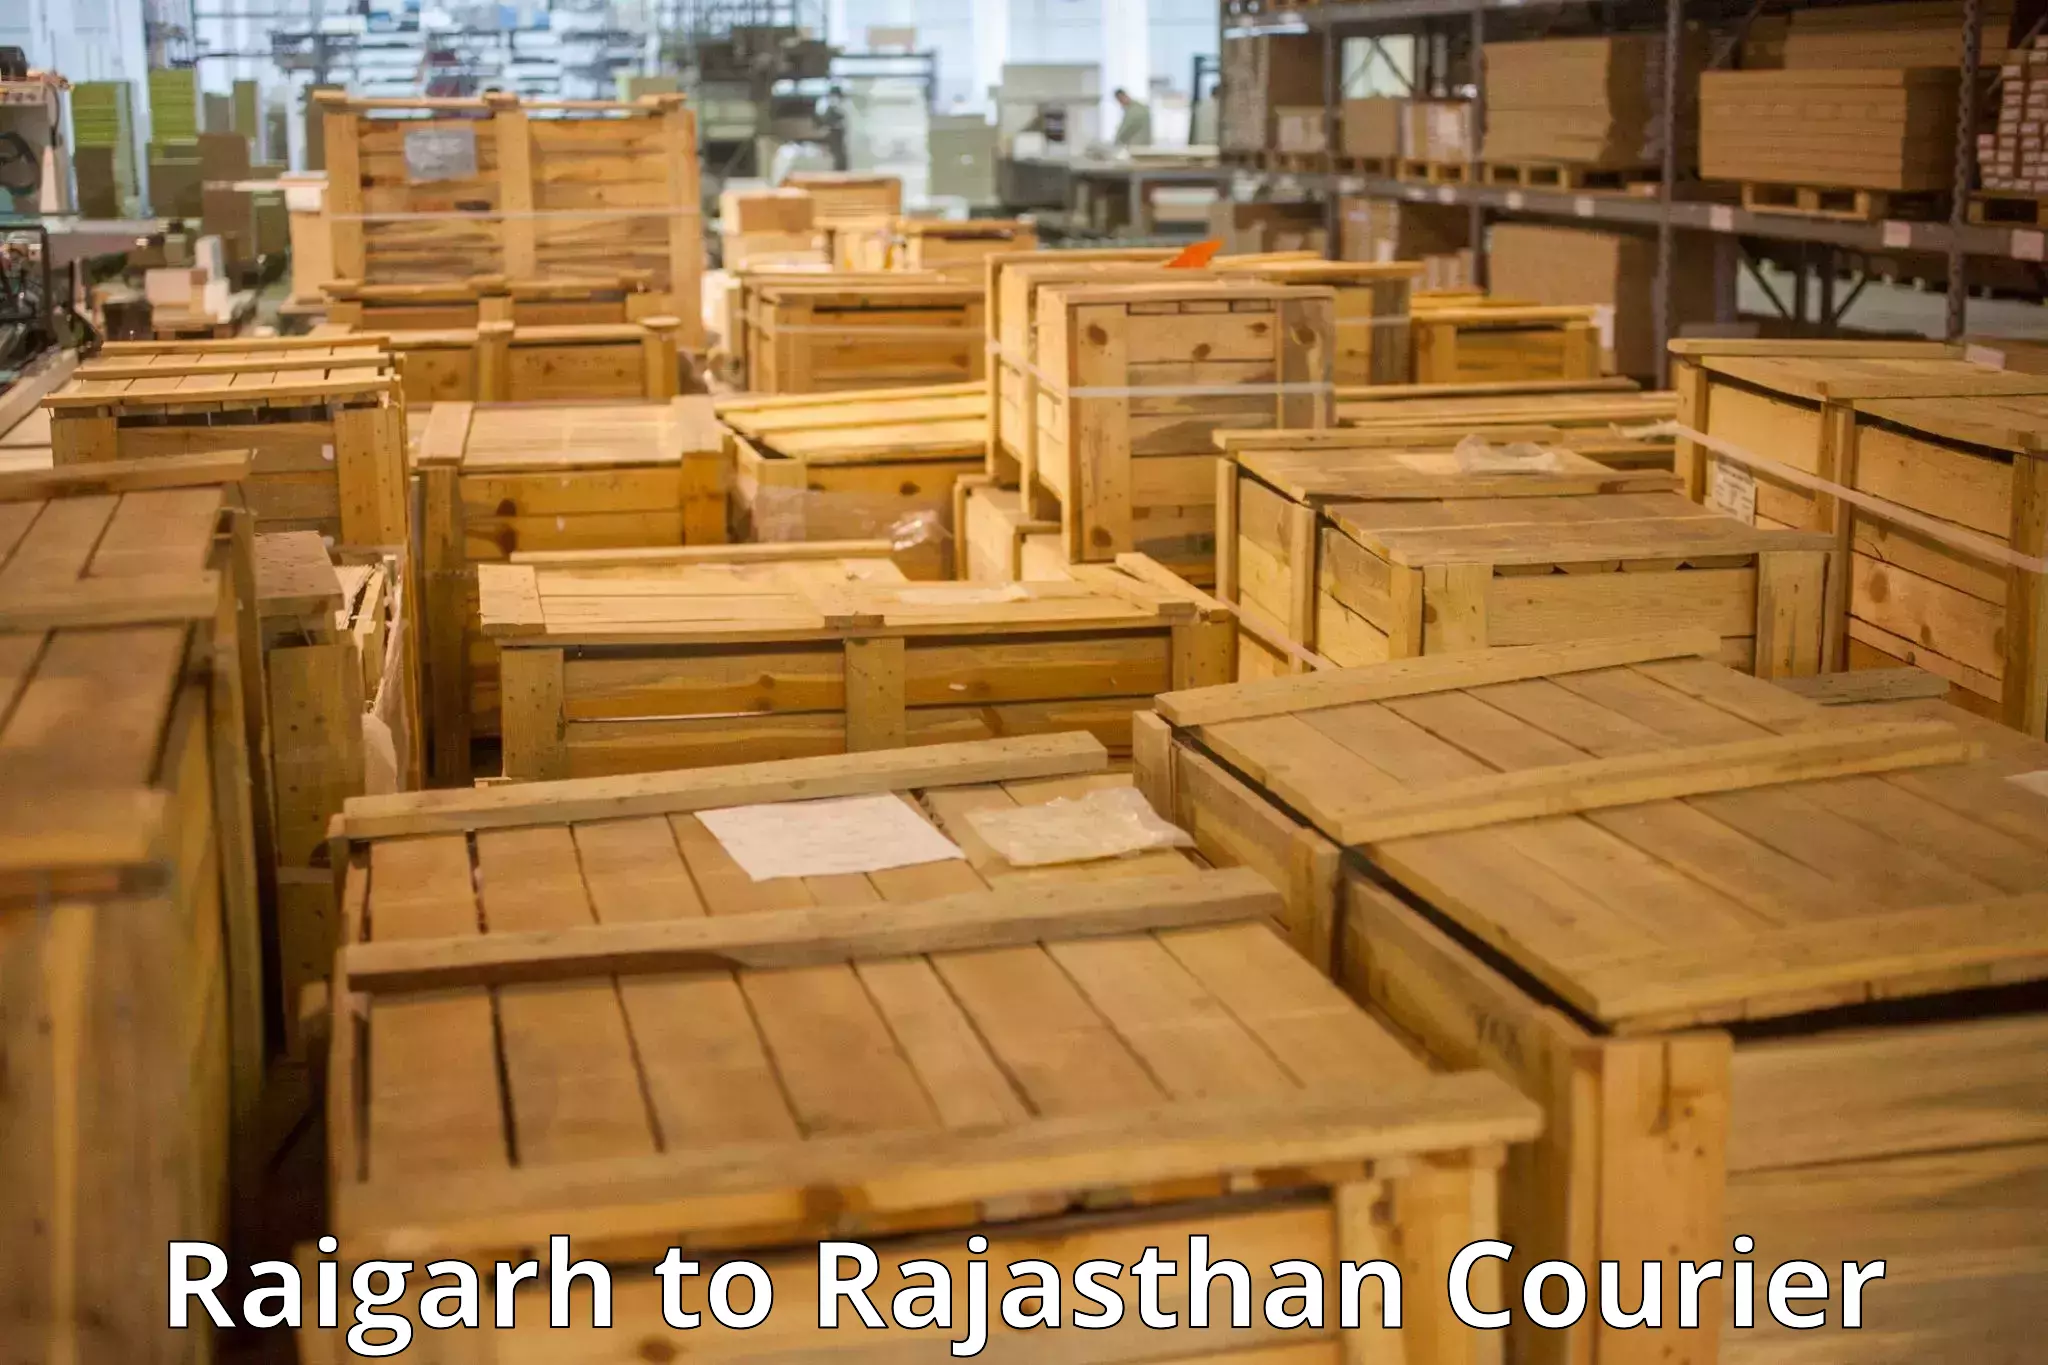 Luggage shipping planner Raigarh to Udaipur